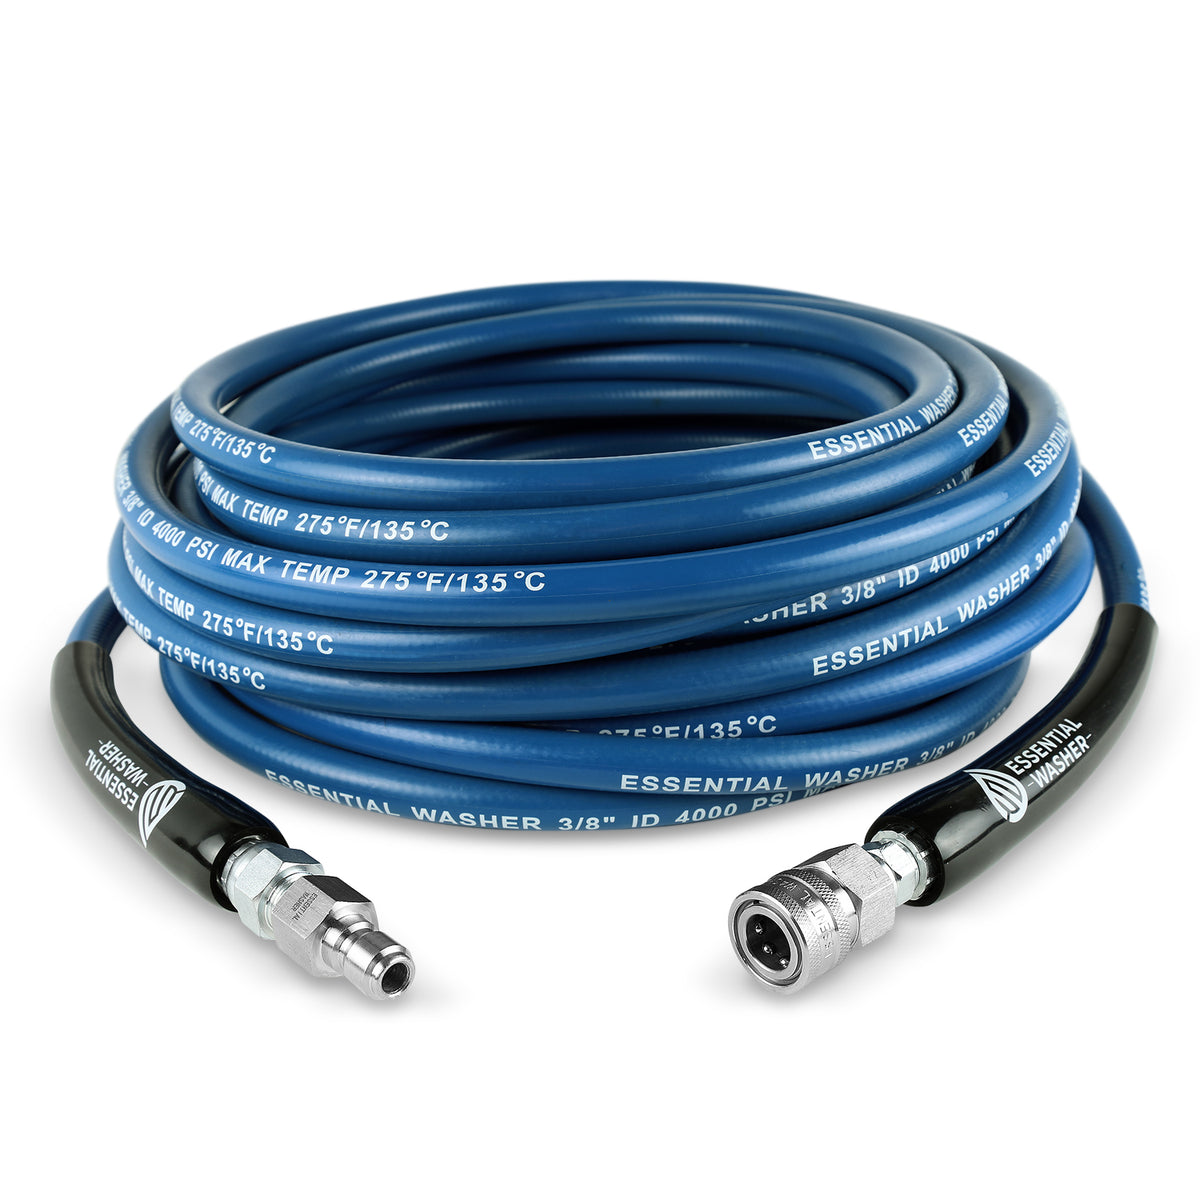 50 FT Blue Pressure Washer Hose With Stainless Steel Fittings